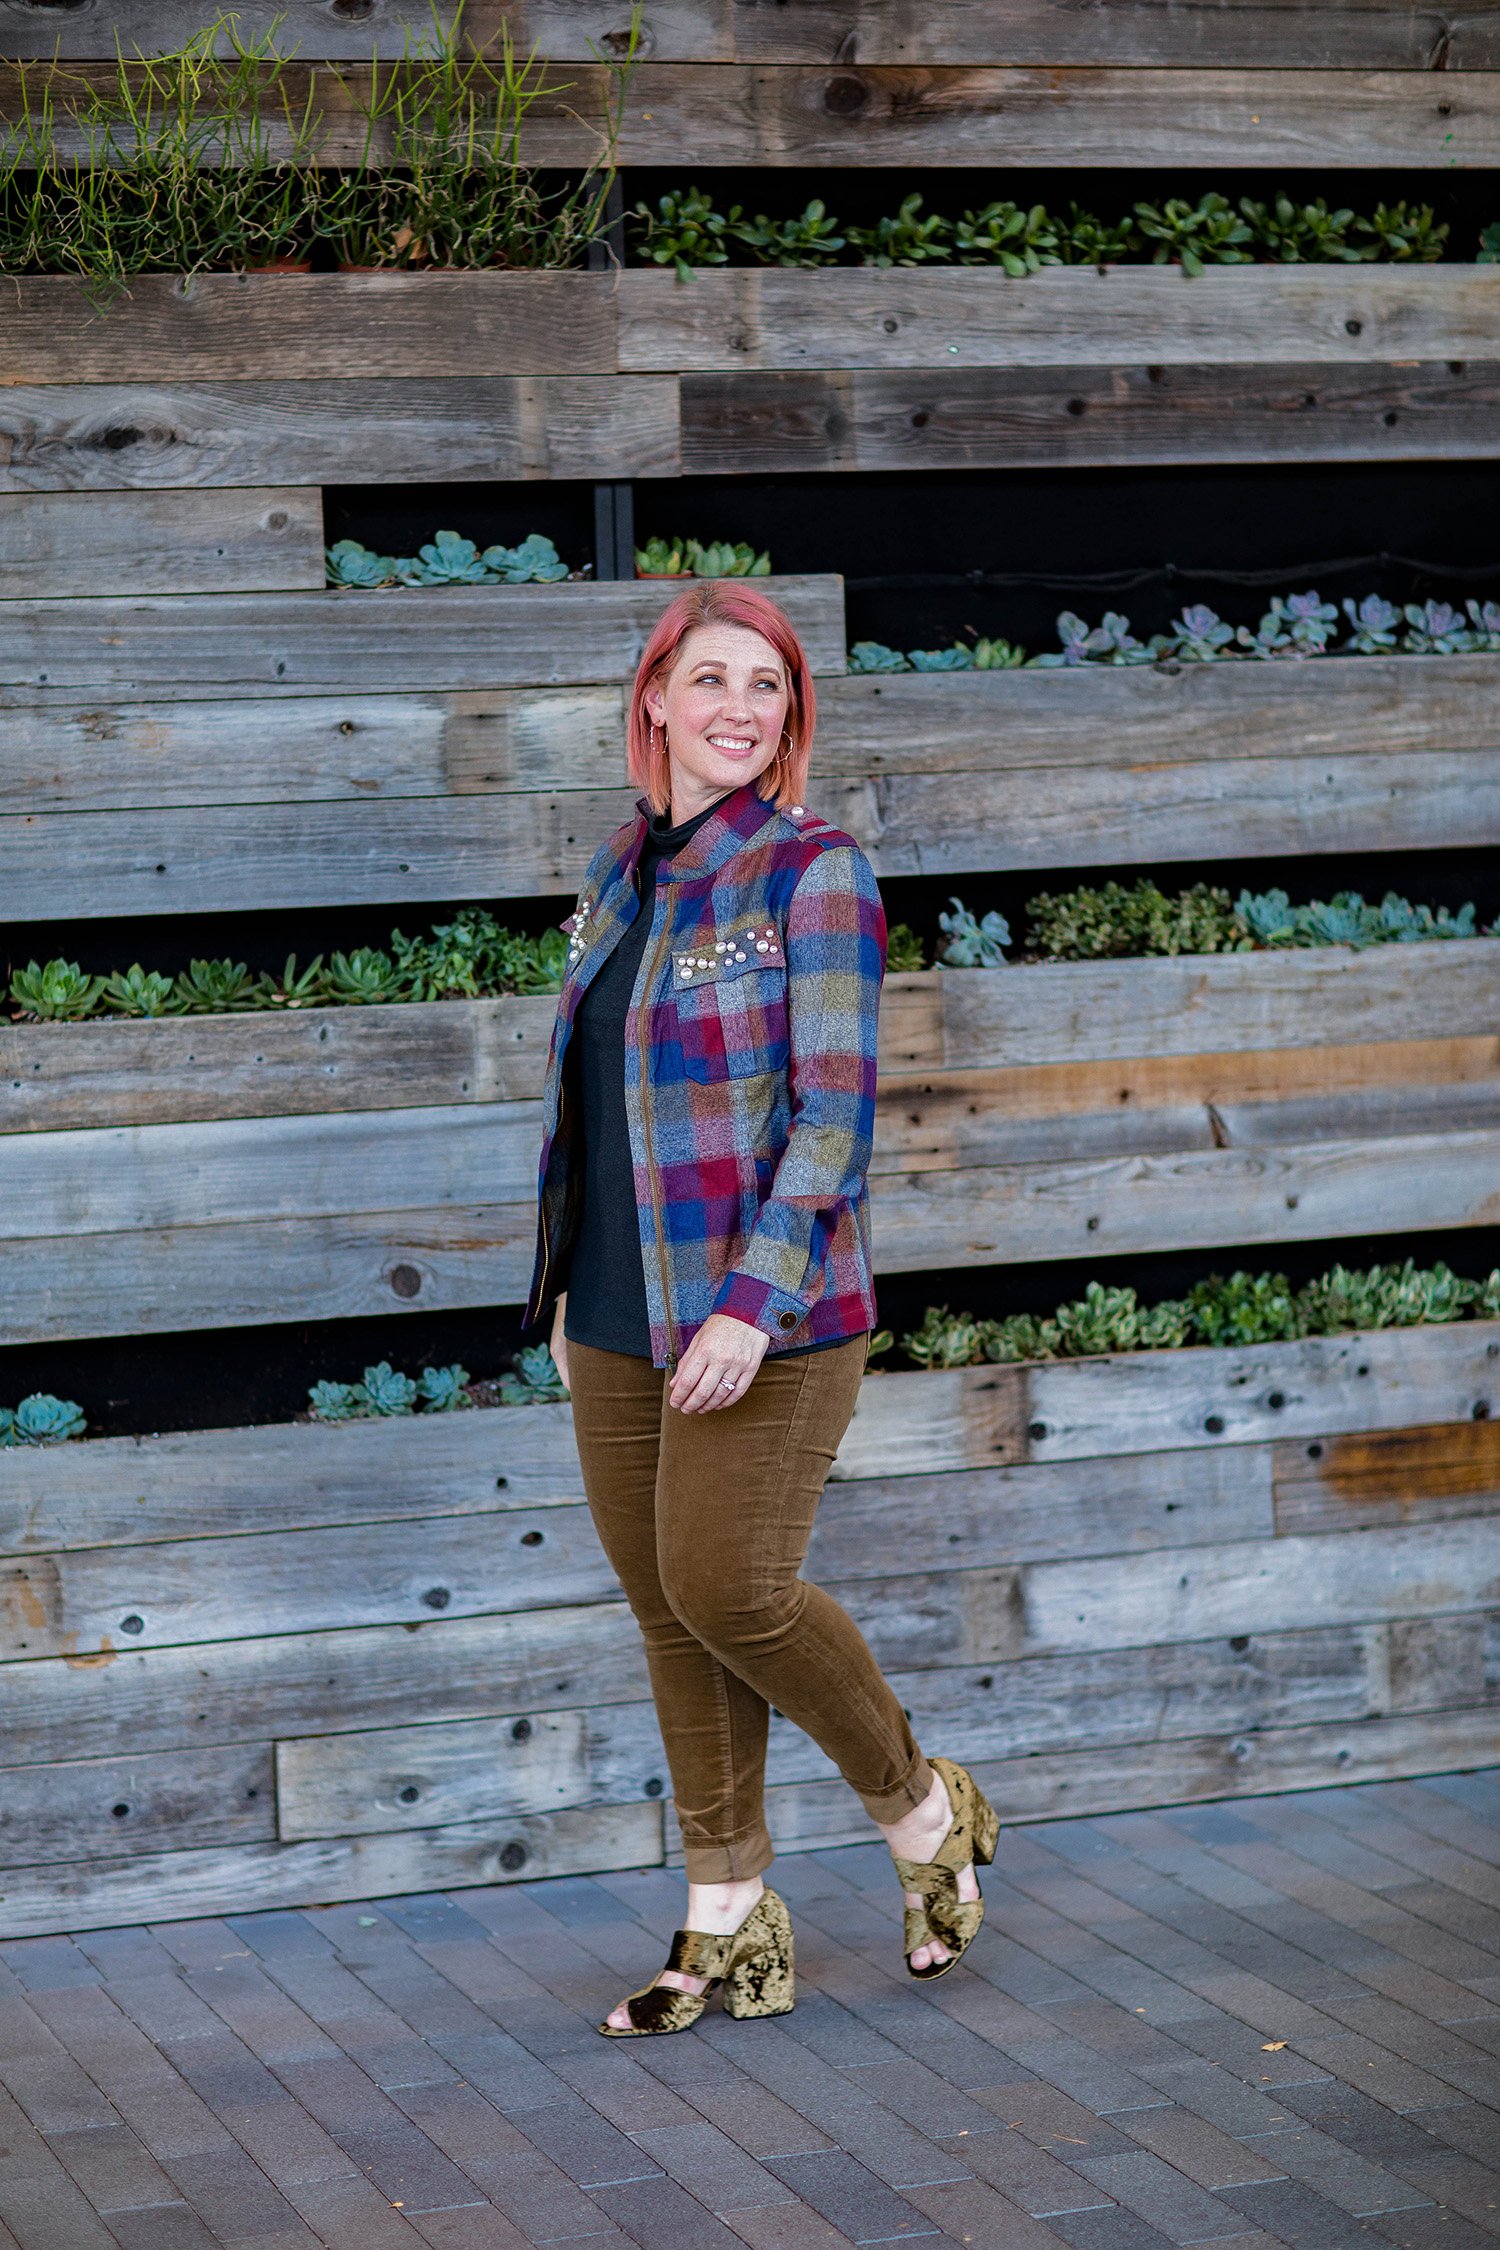 Looking for a great winter jacket? This plaid one is perfect for layering!